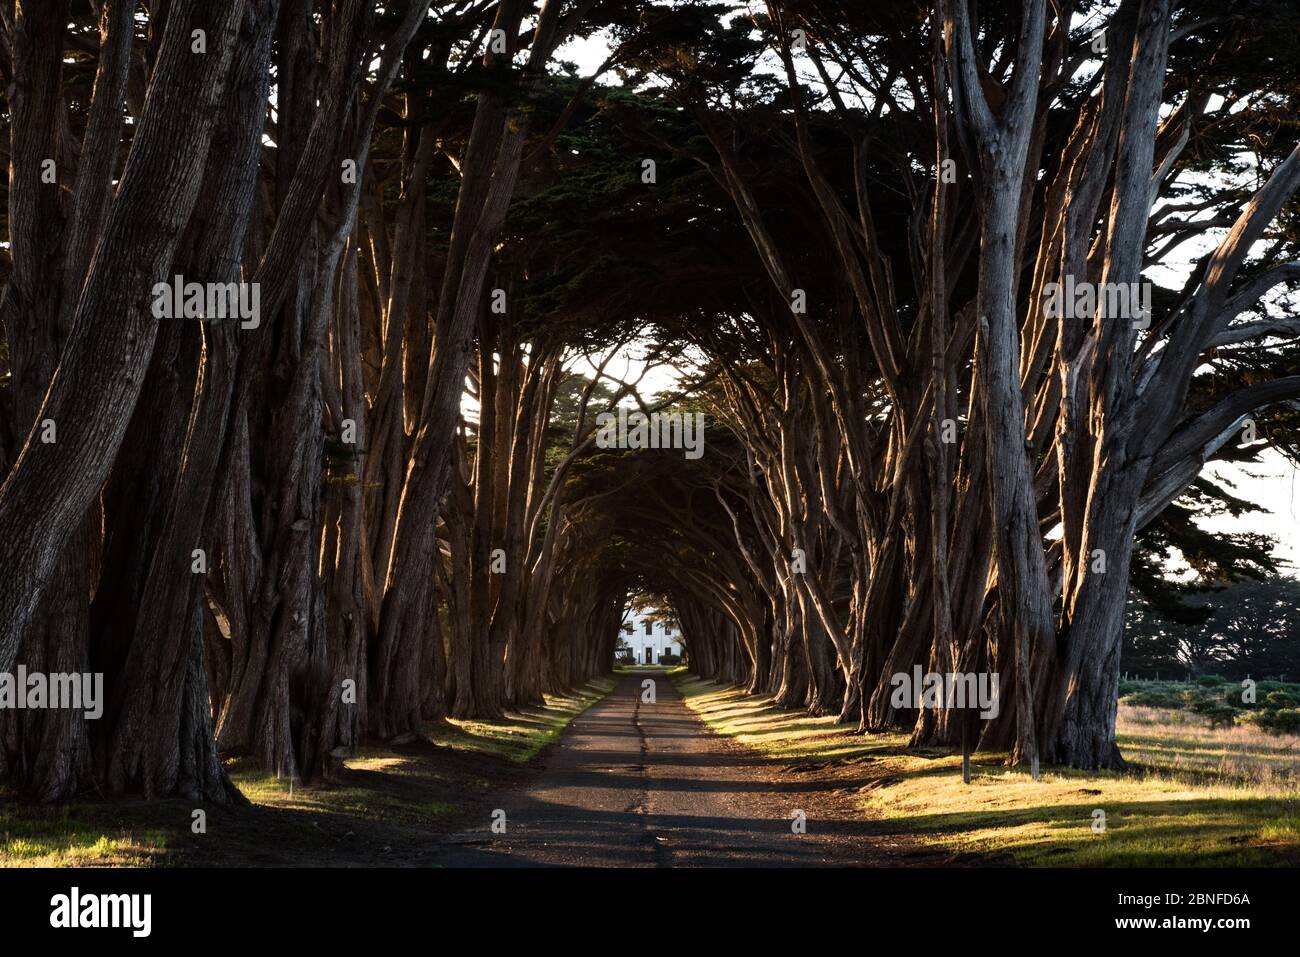 POINT REYES STATION, UNITED STATES - Apr 24, 2020: Tunnel of trees during sunset Stock Photo